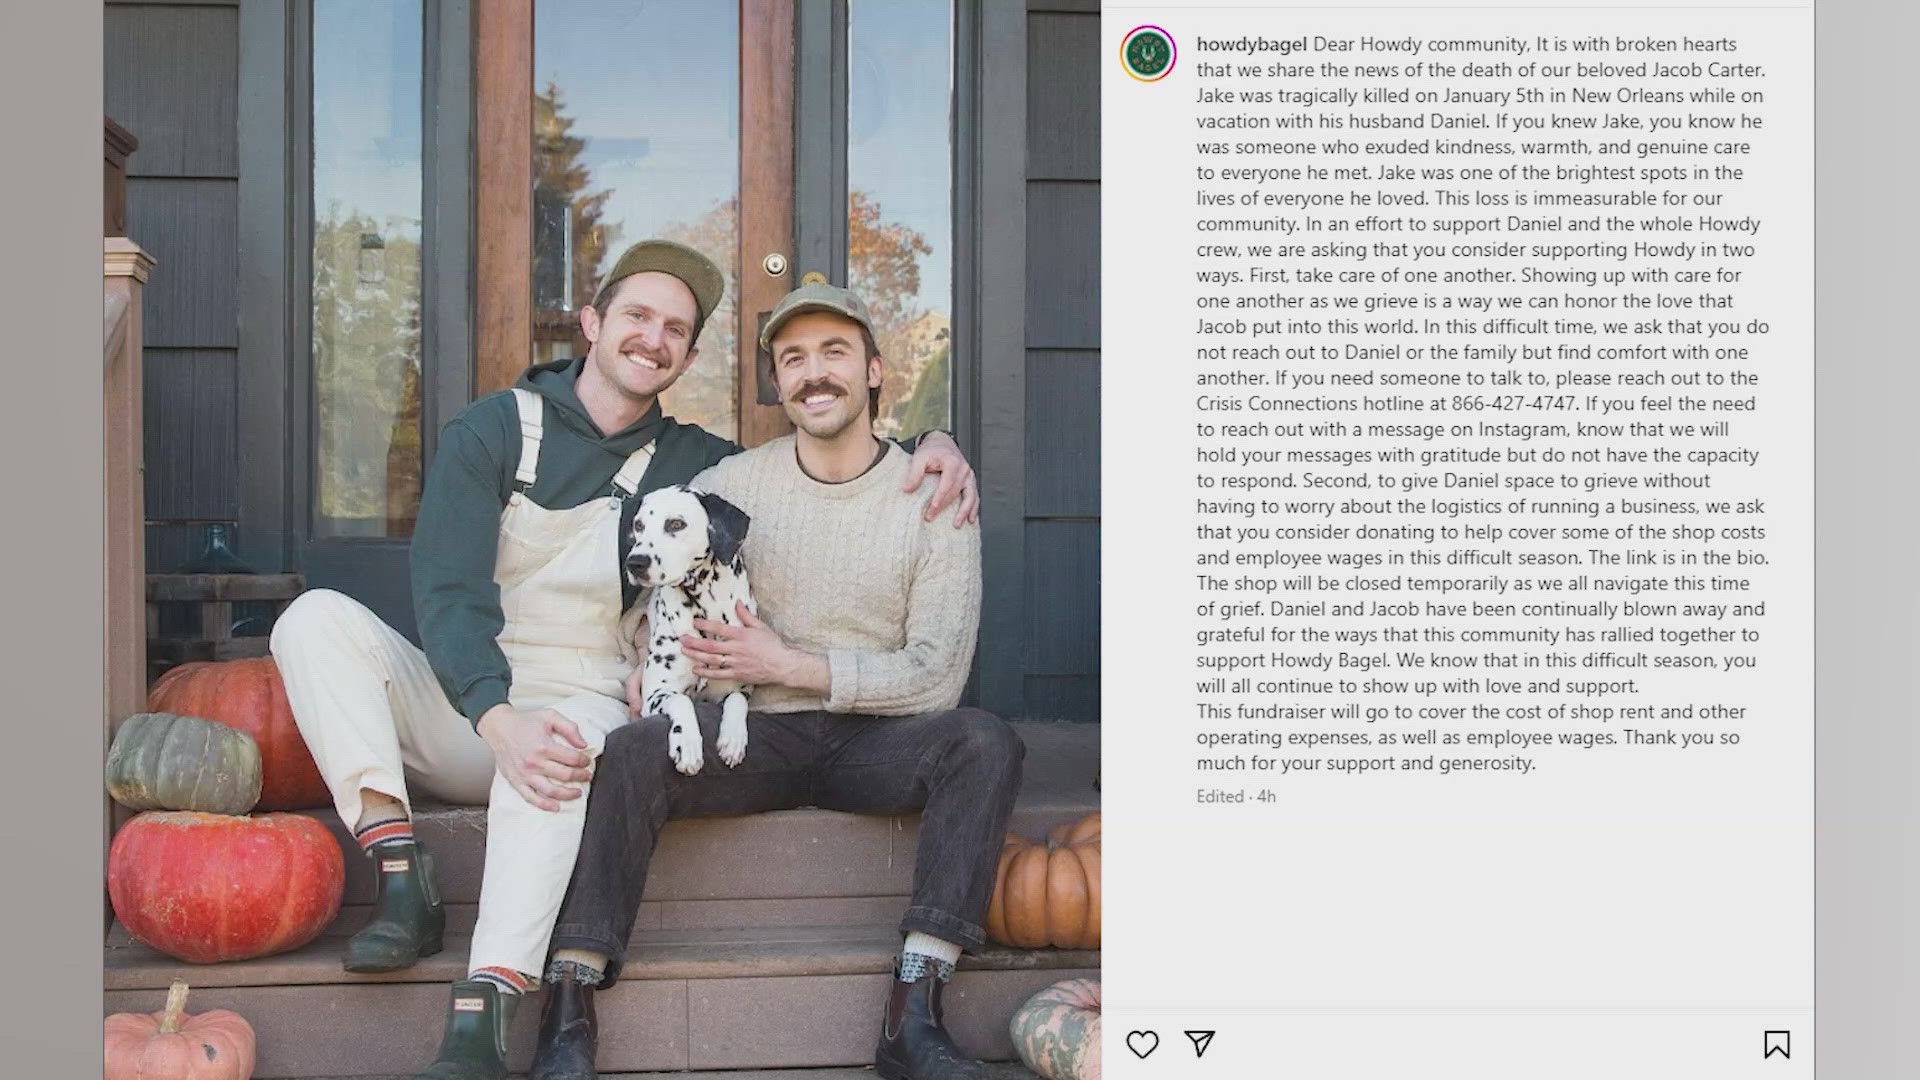 Jacob Carter, owner of Tacoma's Howdy Bagel, was killed while on vacation in New Orleans with his husband.